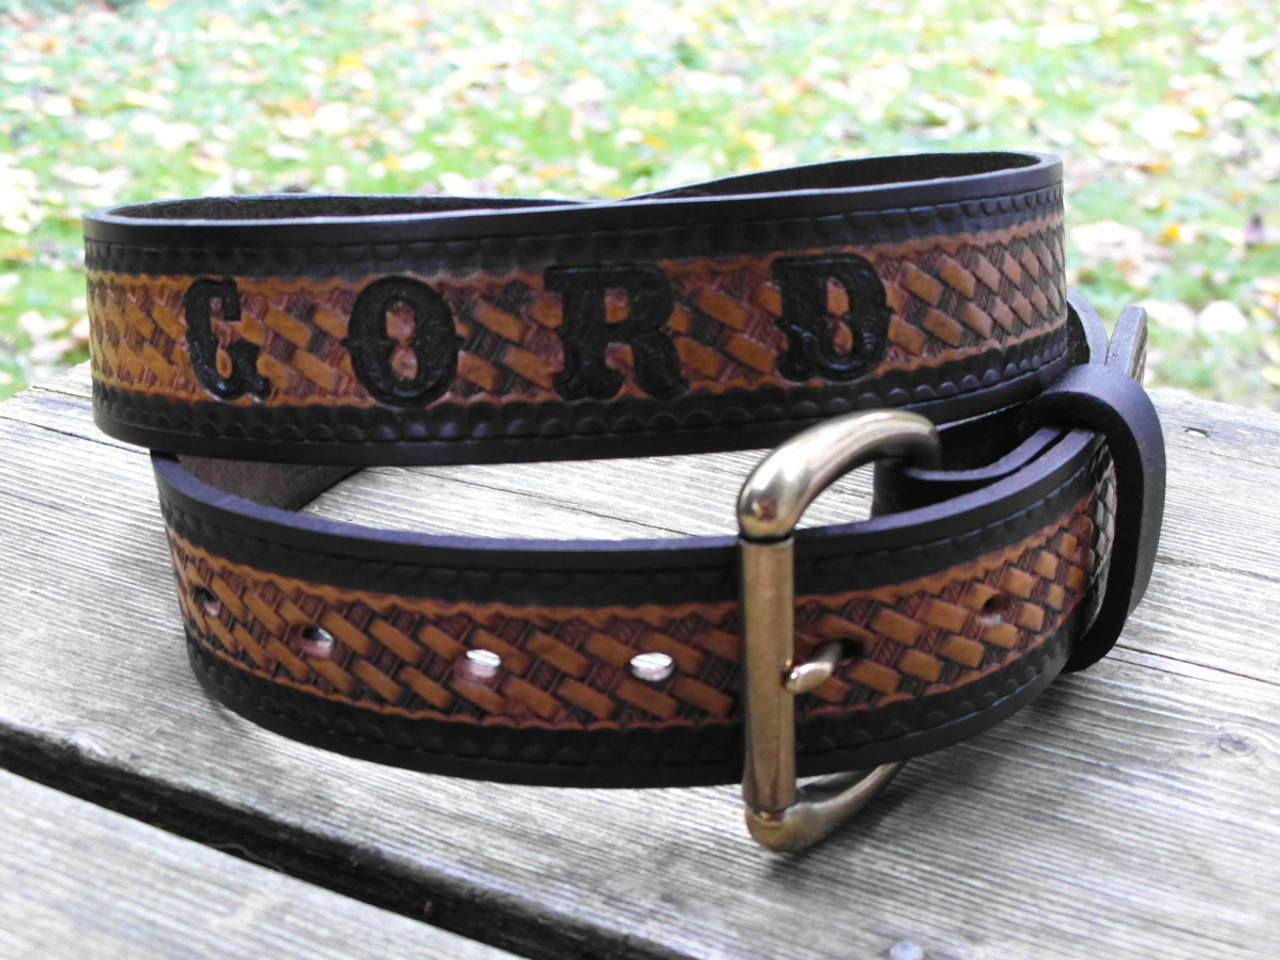 BC Belts Leather Belt Strap with Embossed Basket Weave Pattern 1.5 Wide with Snaps